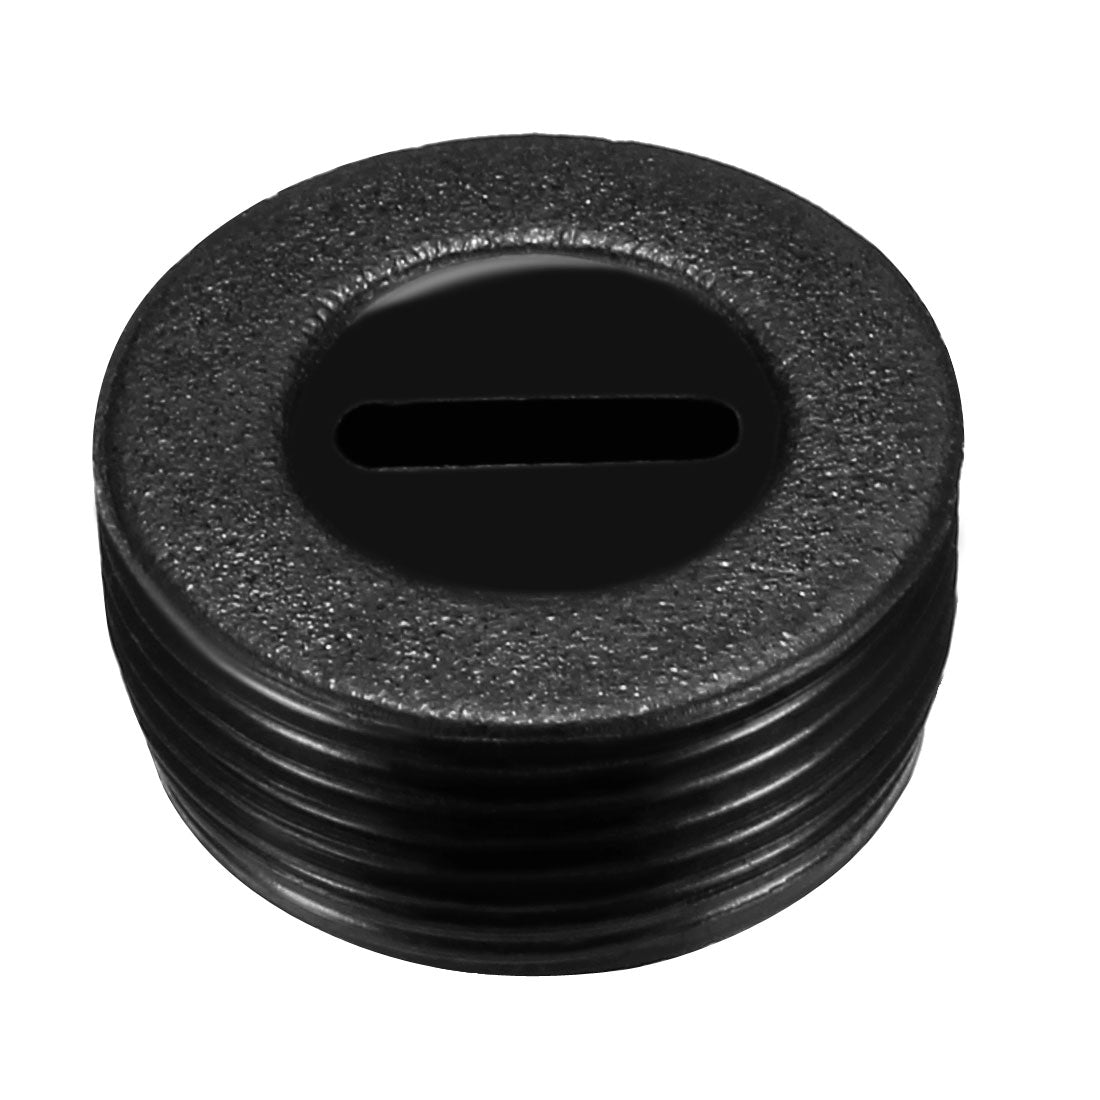 uxcell Uxcell Carbon Brush Holder Caps 17mm O.D. 9.5mm I.D. 7.7mm Thickness Motor Brush Cover Plastic Fitting Thread Black 20pcs